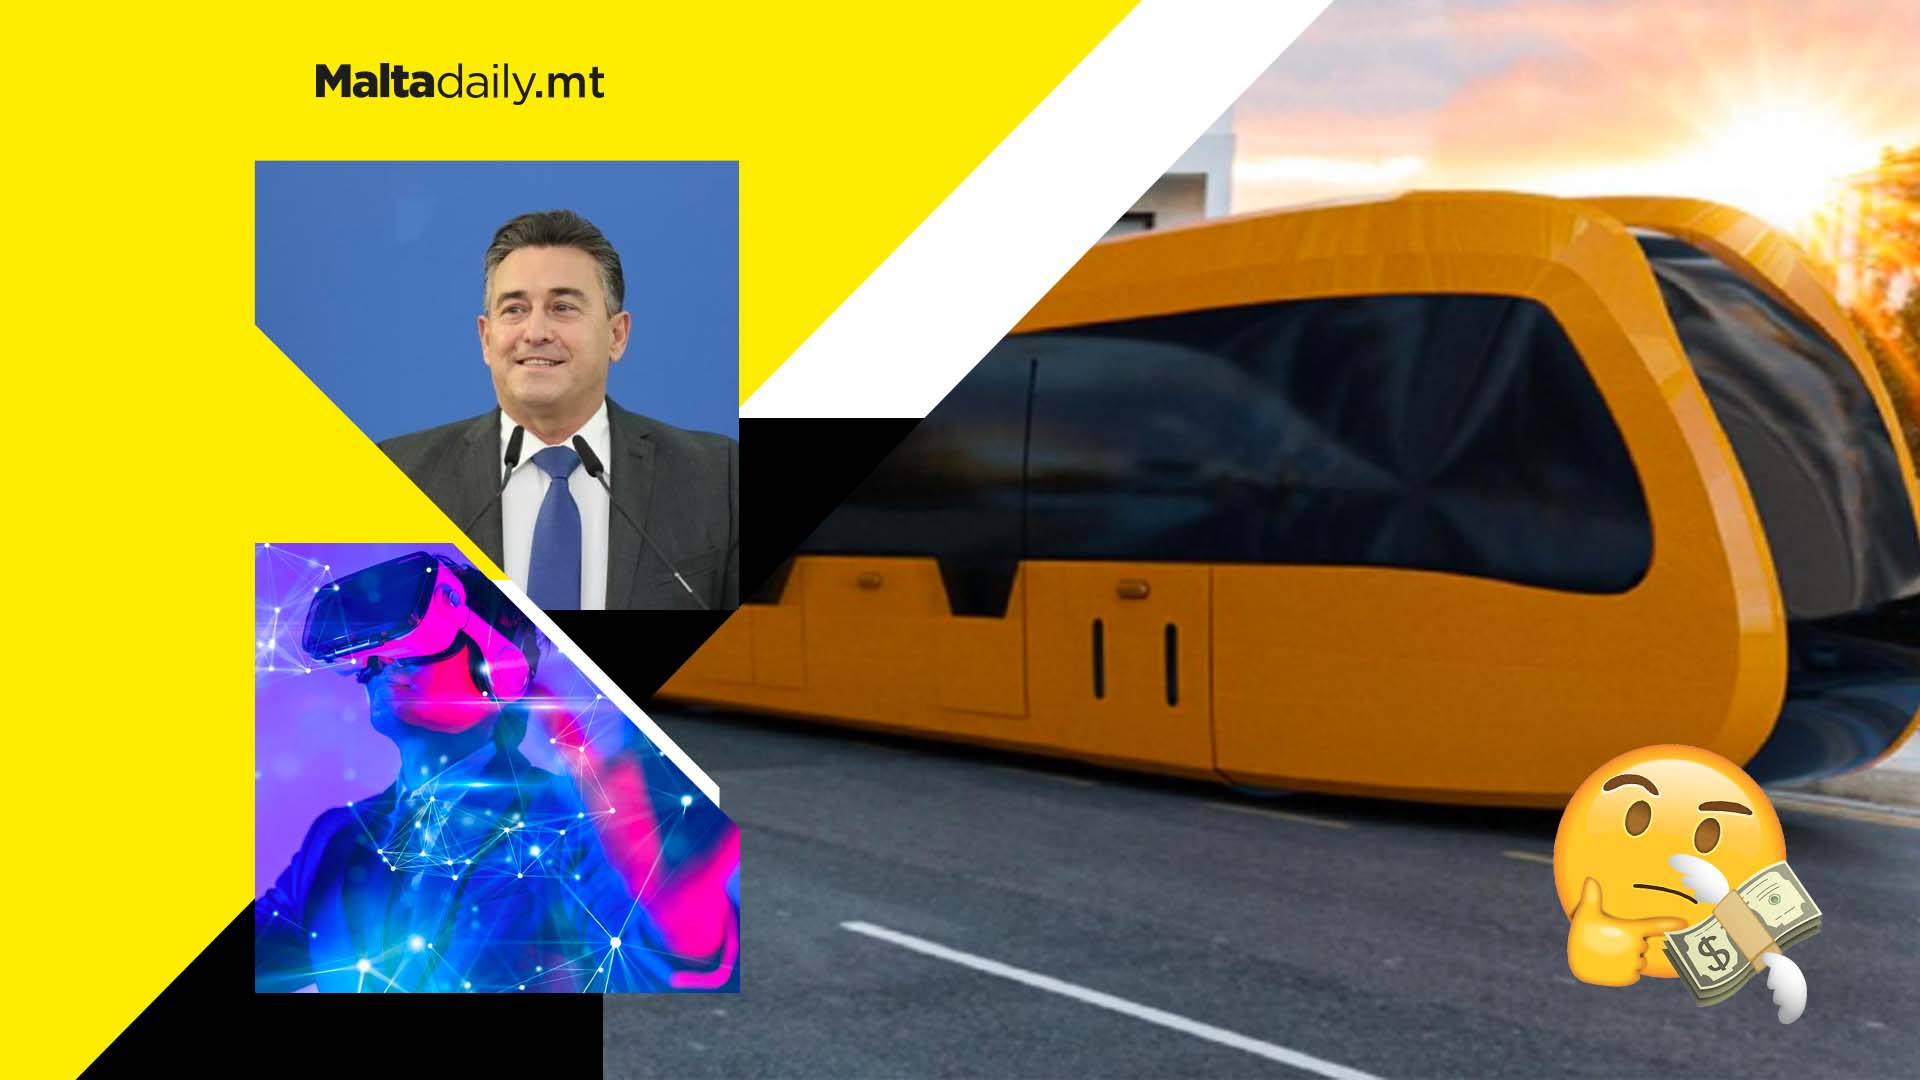 PN election to cost €6 billion party reveals - trackless tram €2.8 billion